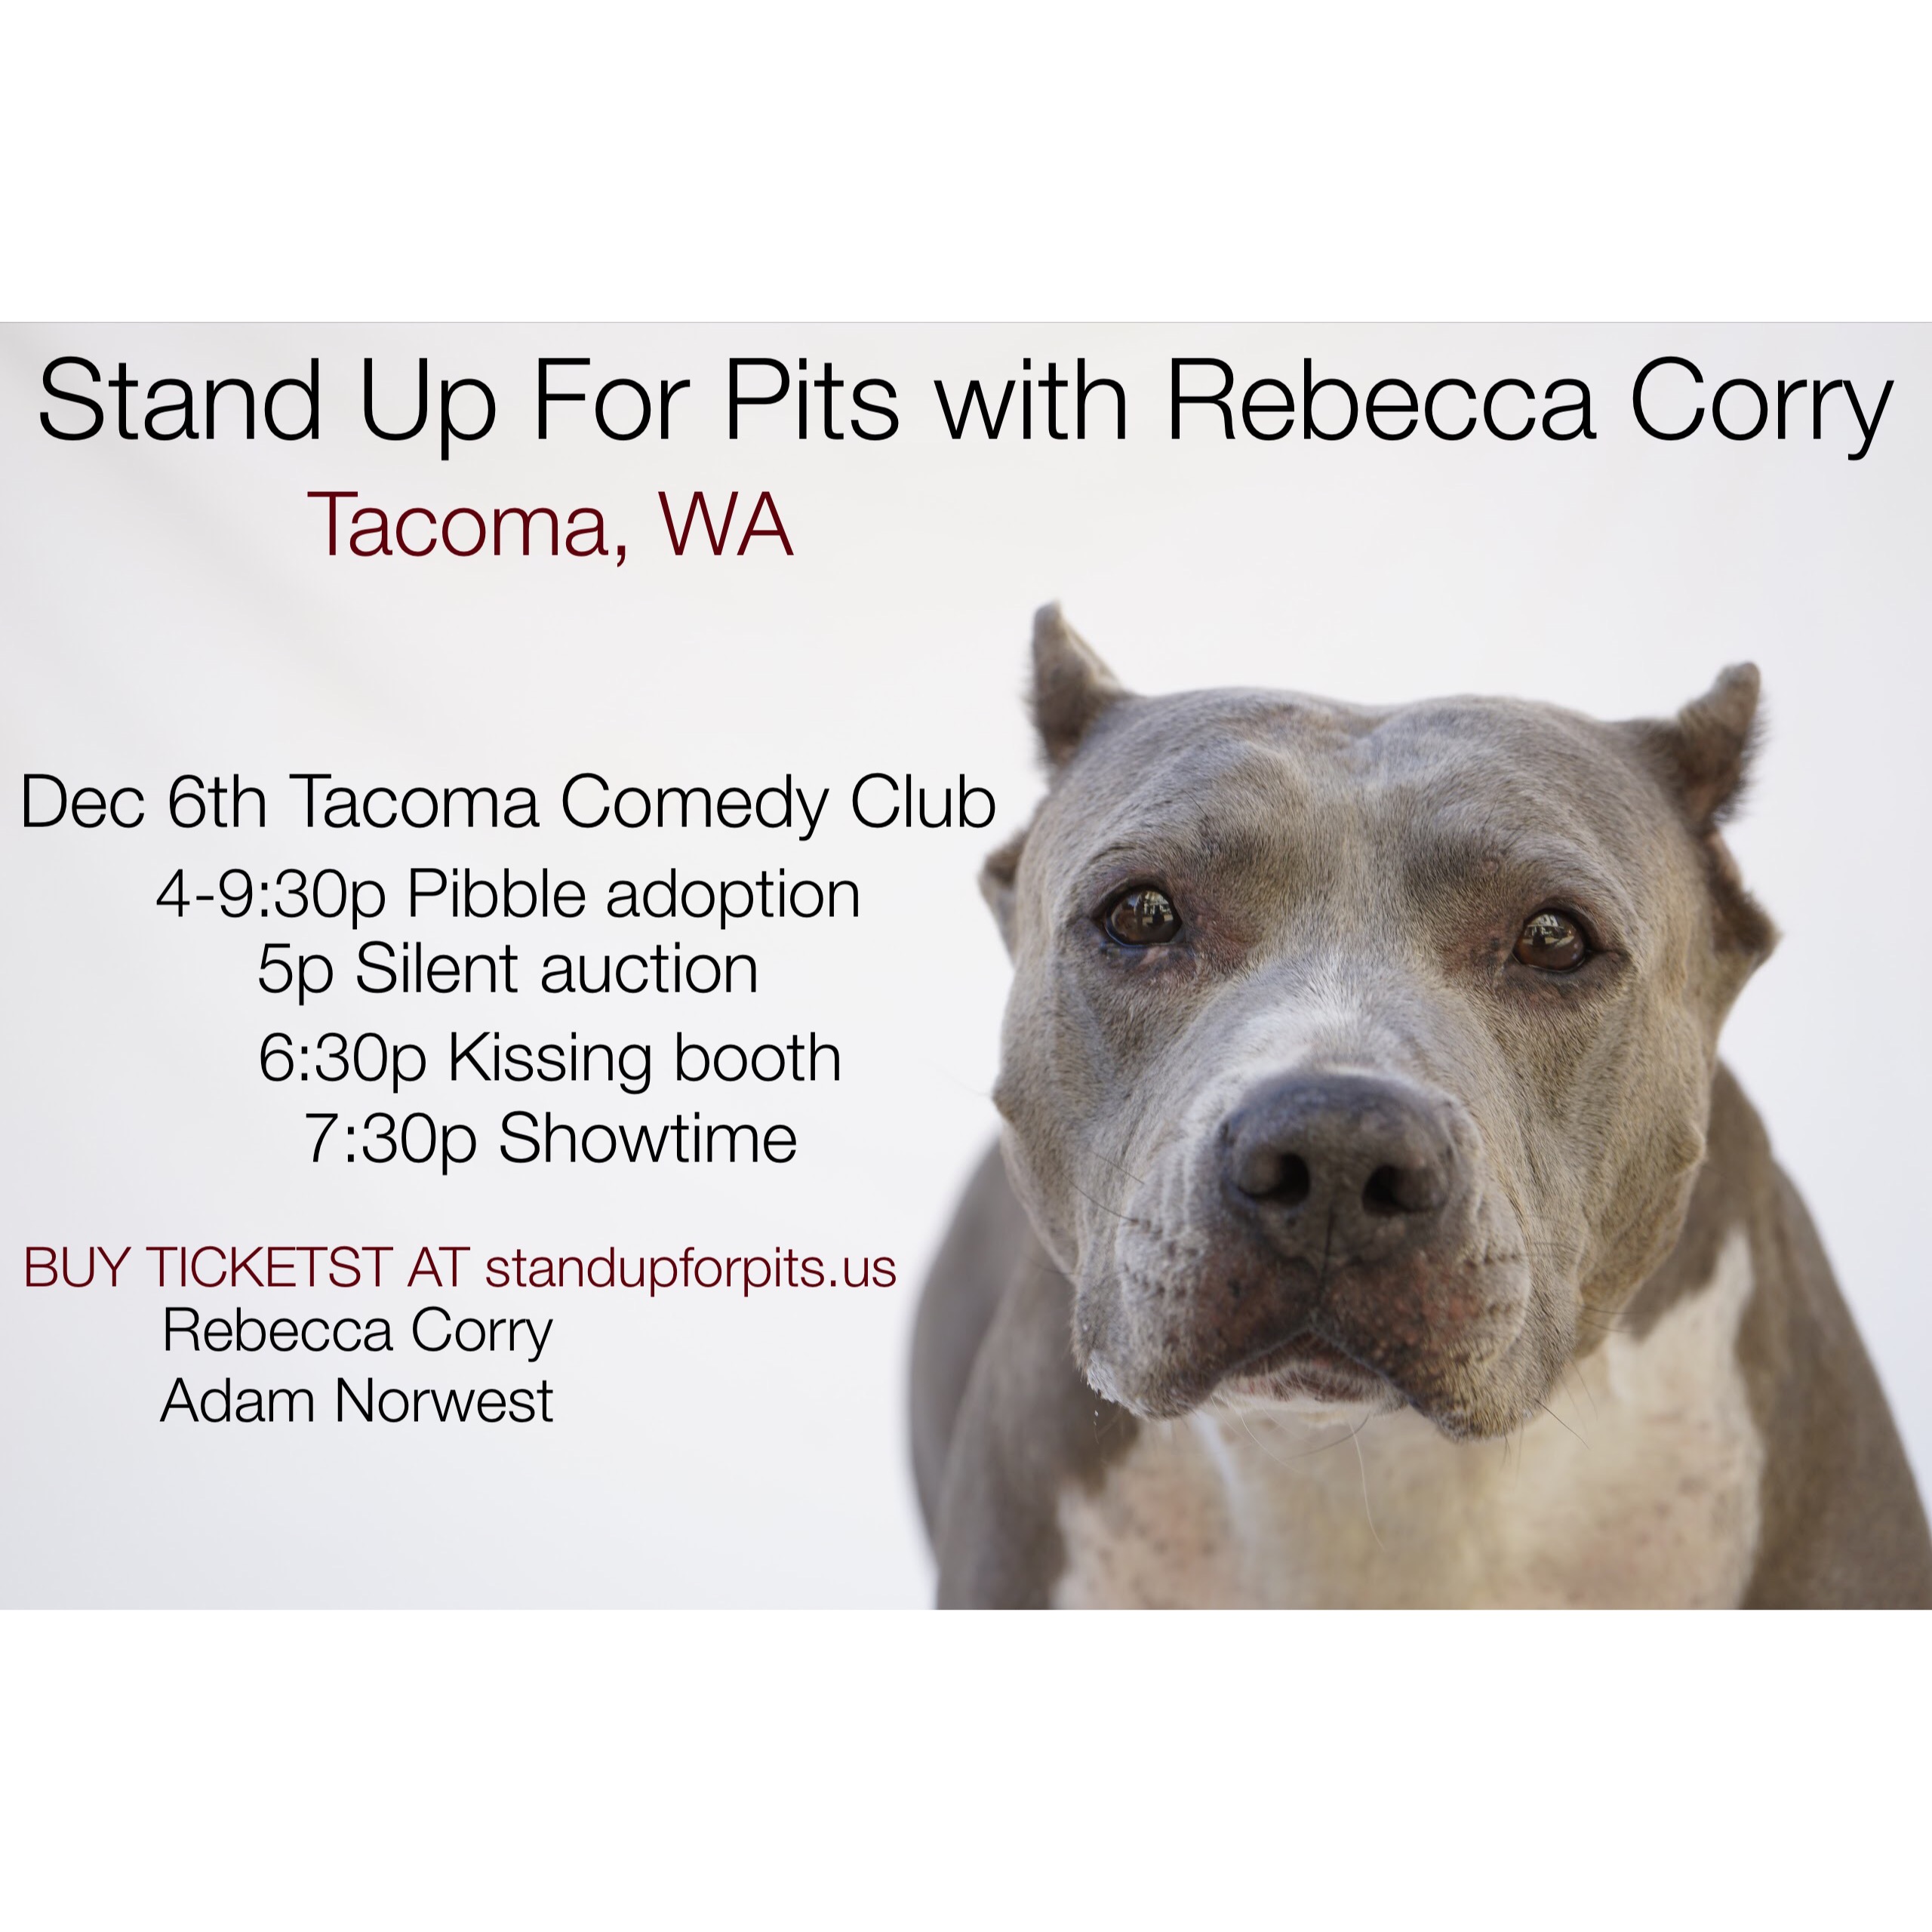 TACOMA WA Stand Up For Pits tickets ON SALE NOW!